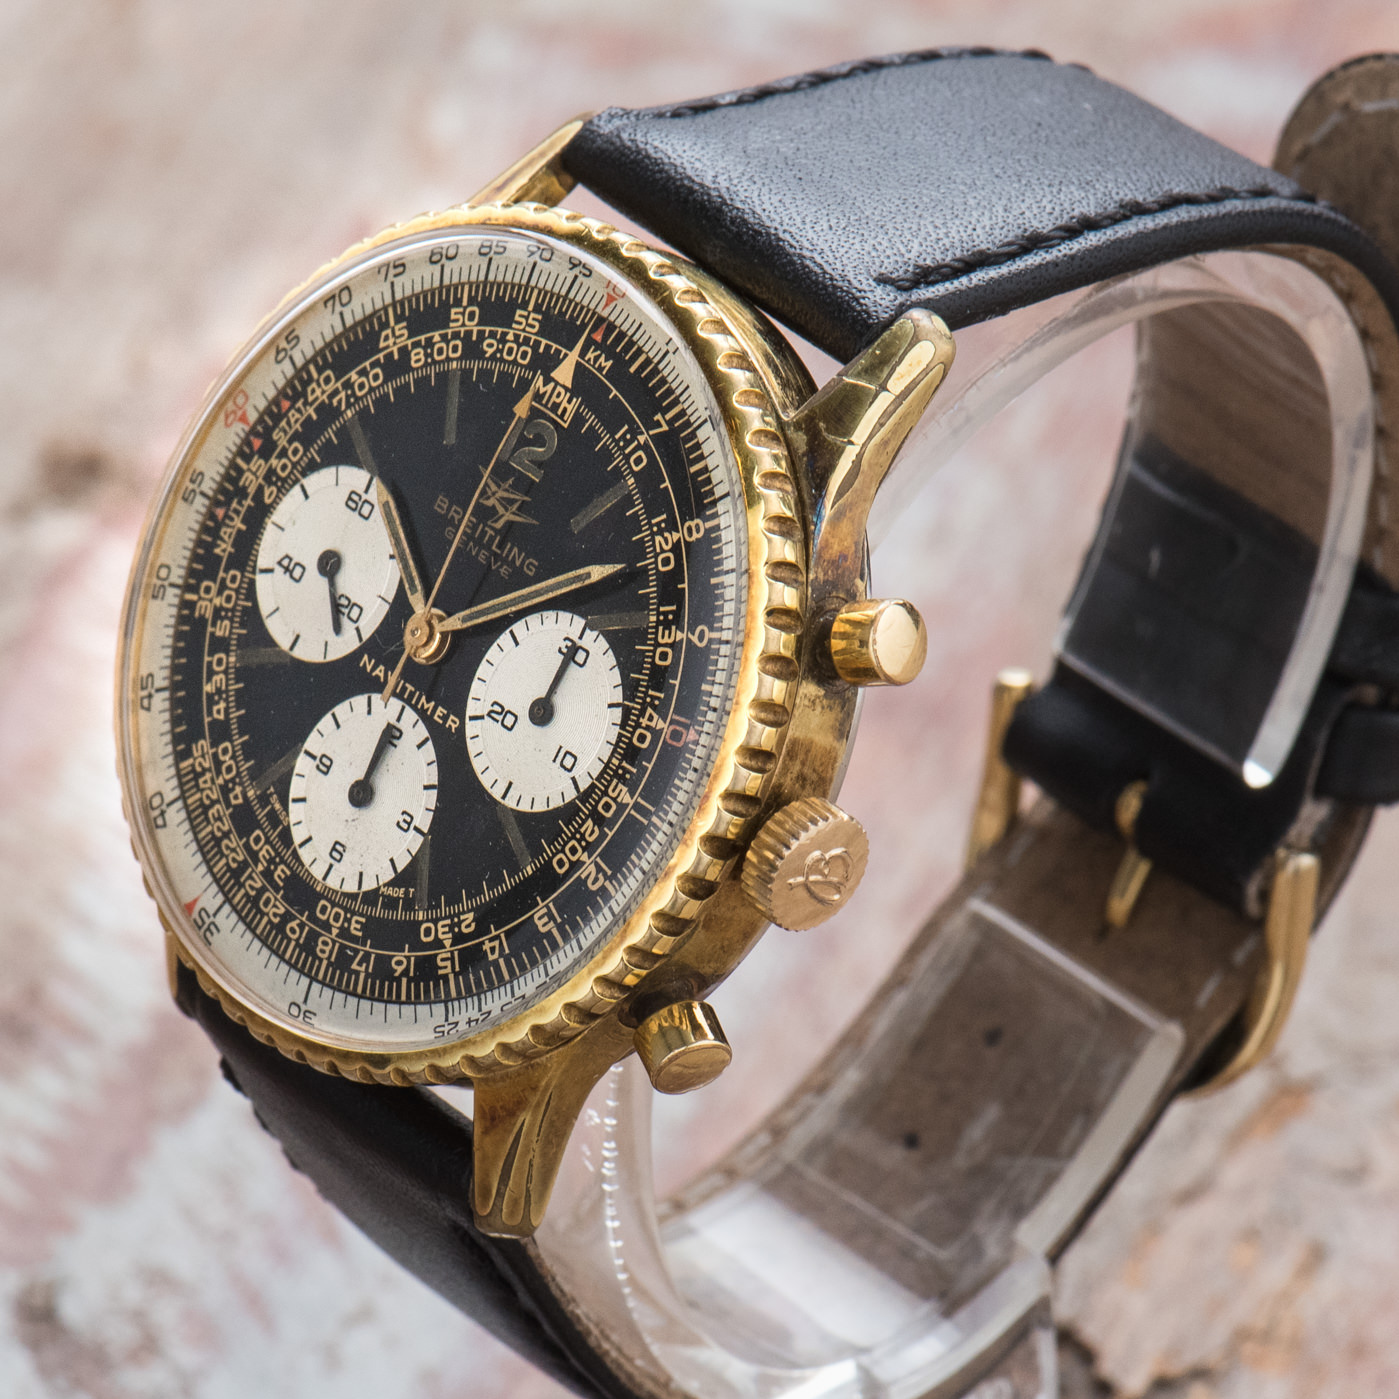 Breitling Navitimer Ref 806 Chronograph Cal. 178 Vintage Watch Men’s Early 1960